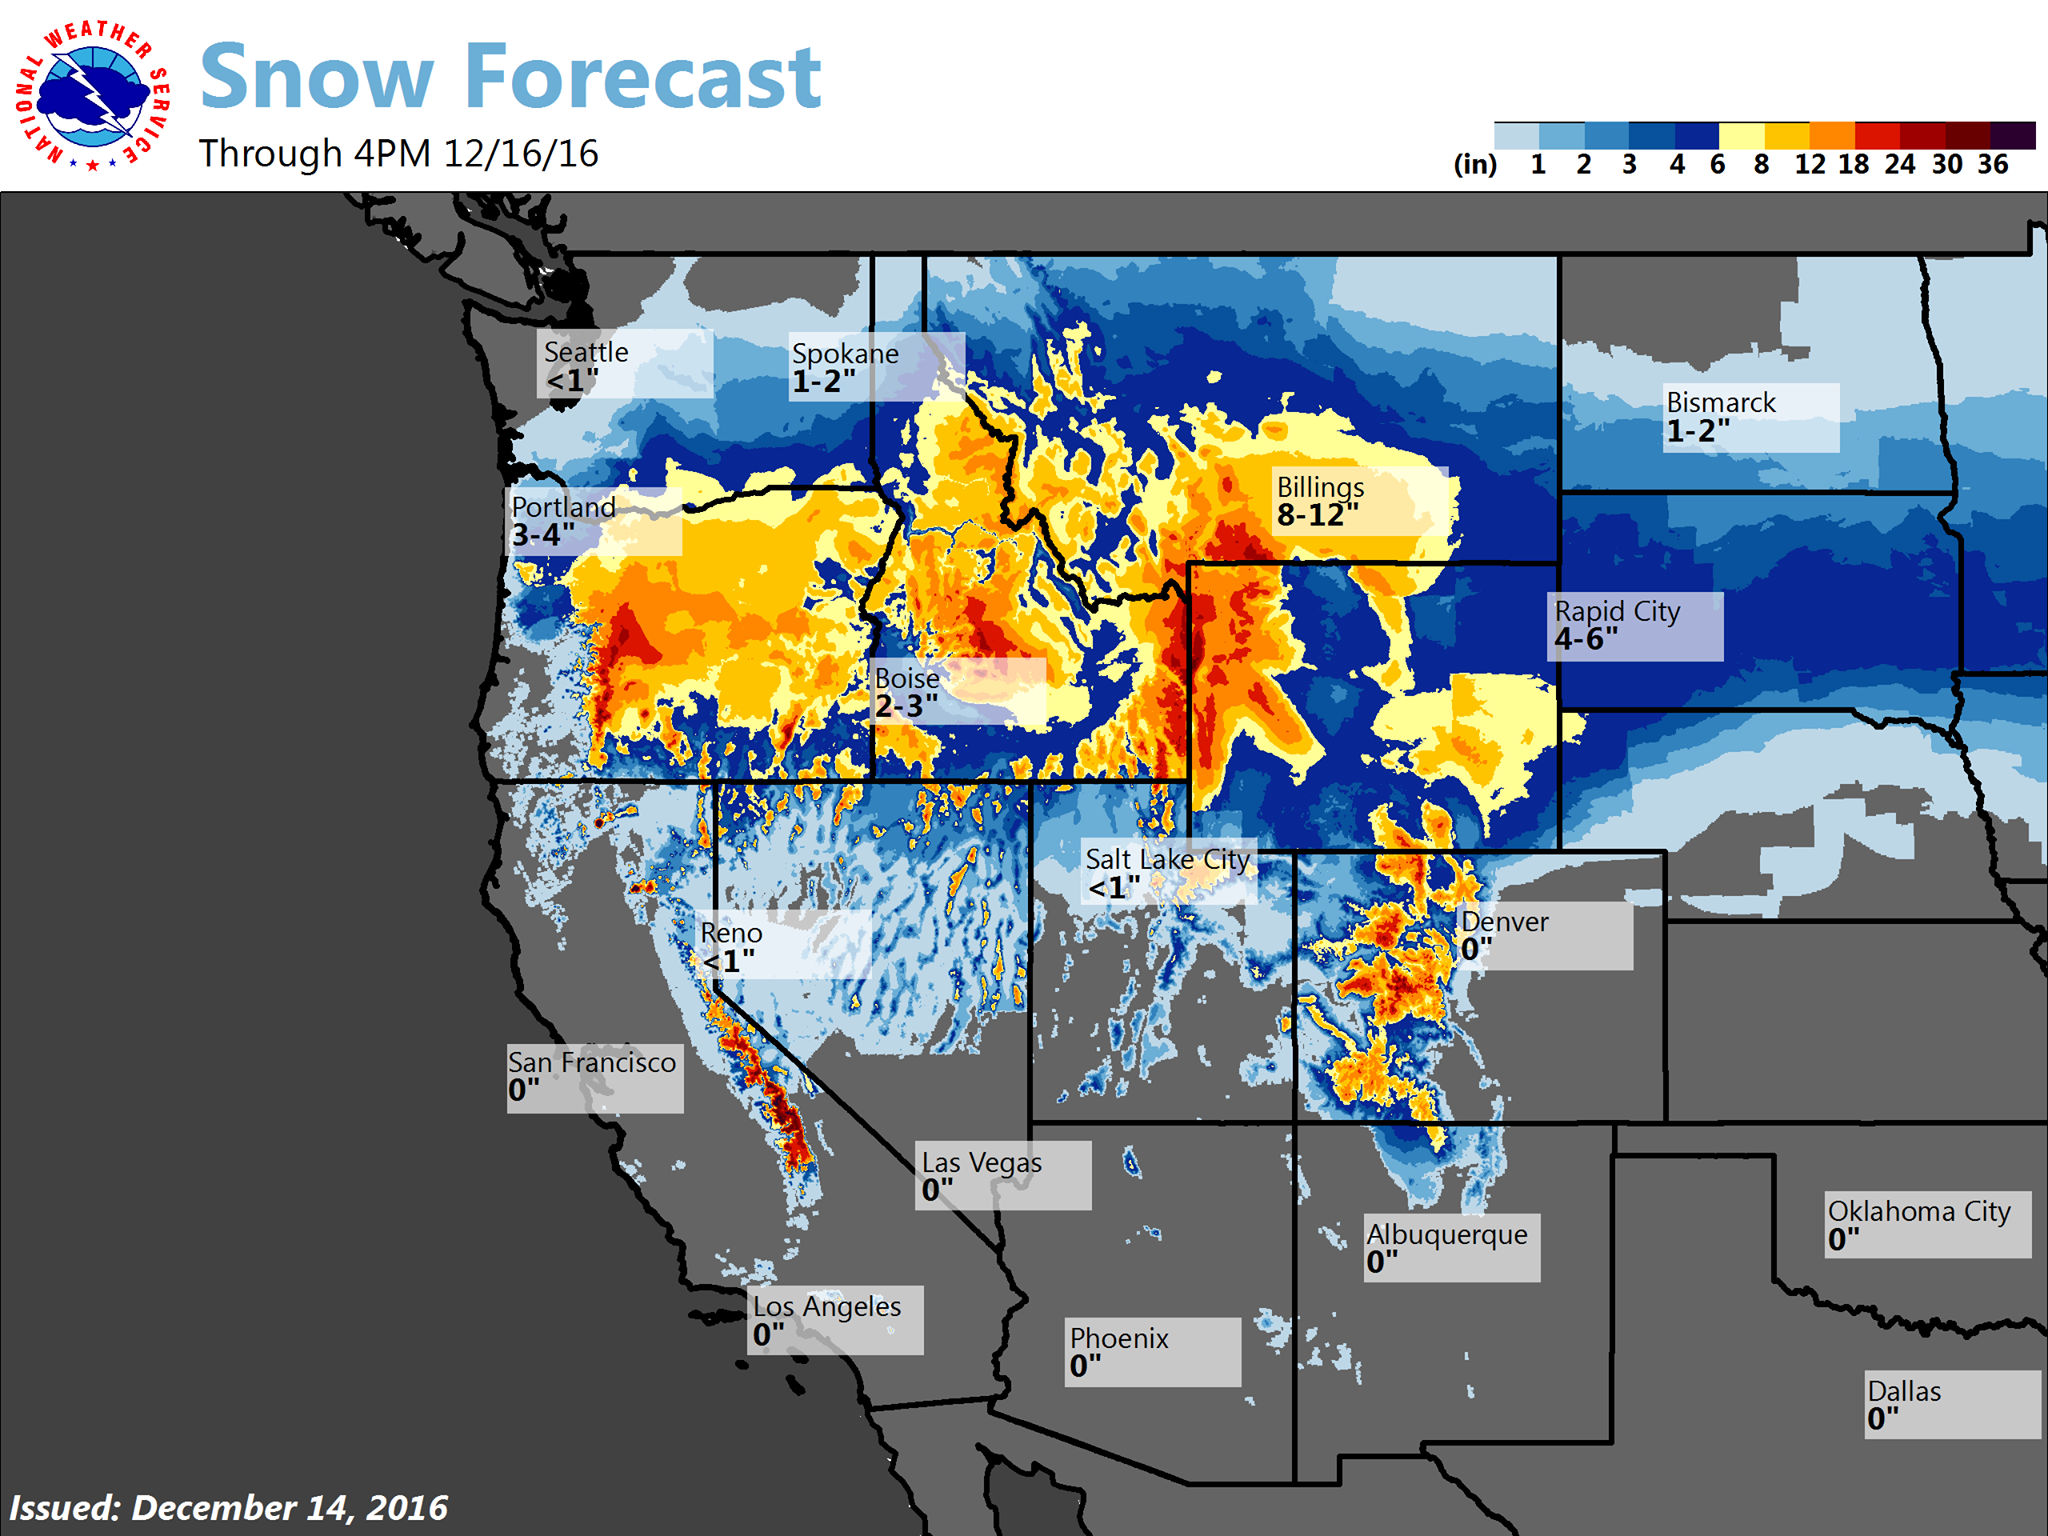 Big snow forecast in the western USA today and tomorrow.  image:  noaa, today